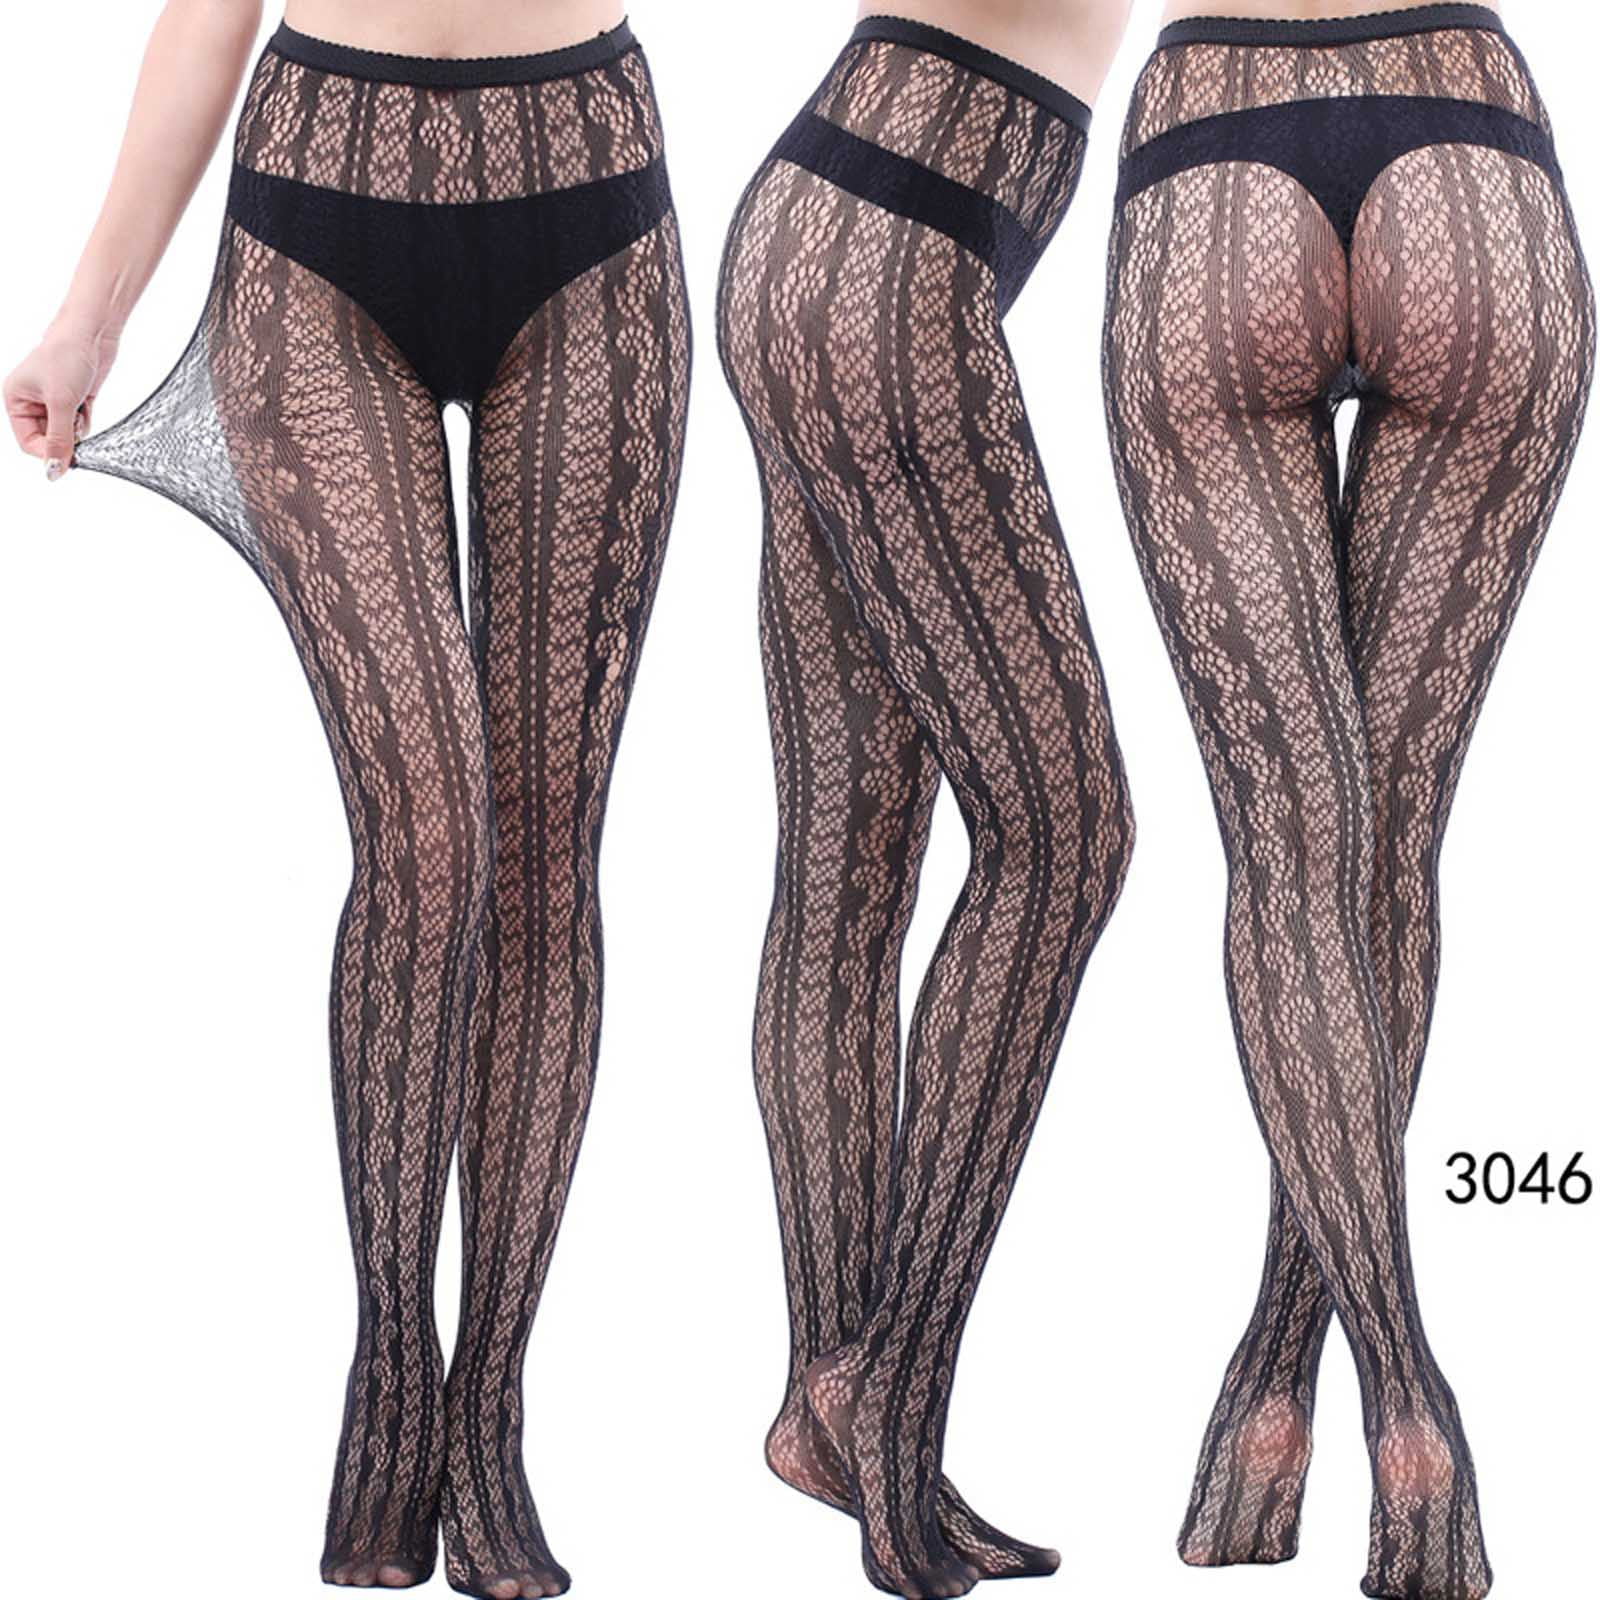 Mesh Tights Leggings Pants And Socks For Women Fashion Sexy Smooth Tight  Top Quality Womens Luxury Stockings Panty Hoses Outdoor Mature Dress Up  Designer Stocking From Superstar_girl, $9.7